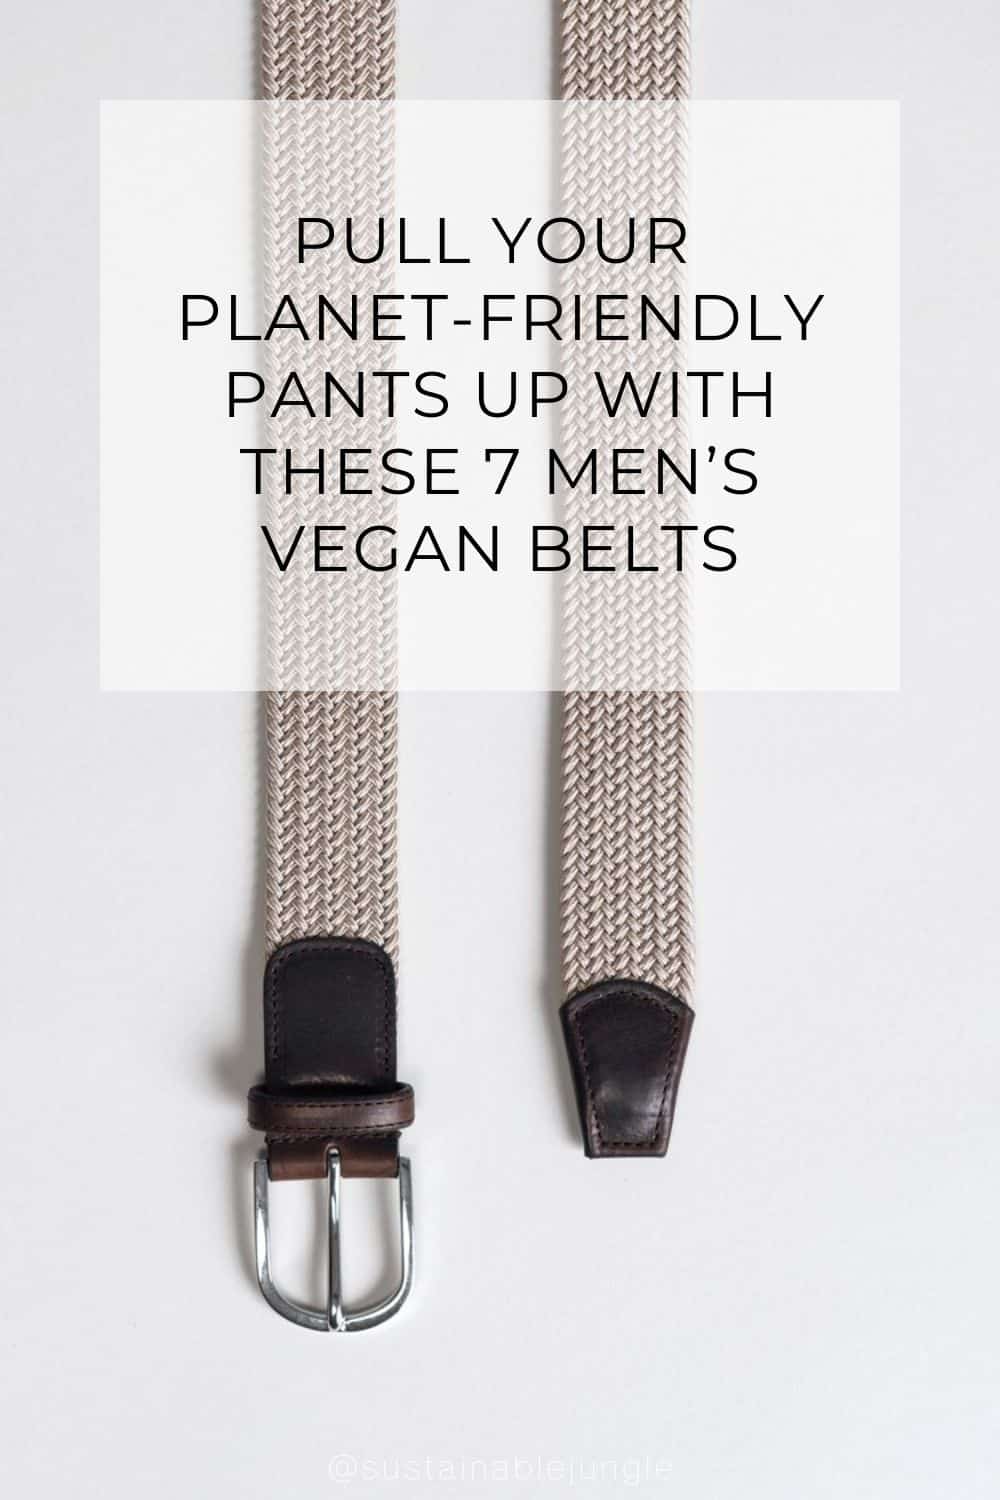 Pull Your Planet-Friendly Pants Up With These 7 Men’s Vegan Belts Image by ASKET #mensveganbelts #mensveganleatherbelts #veganmensbelts #veganbeltsmens #veganbeltsformen #bestveganbeltsformen #sustainablejungle